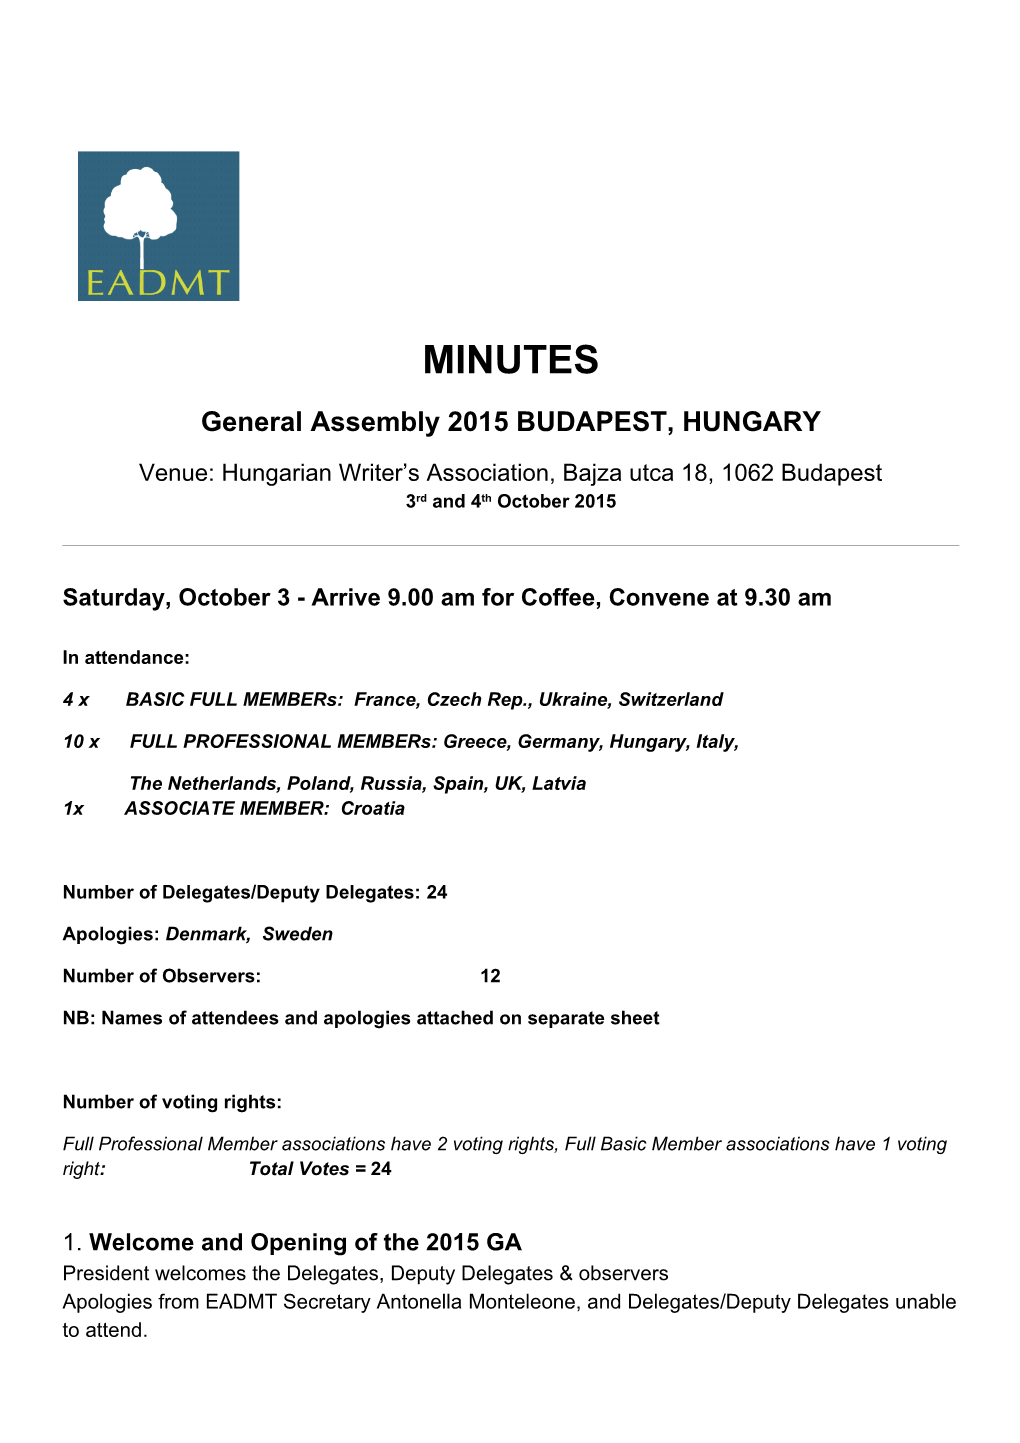 General Assembly 2015 BUDAPEST, HUNGARY